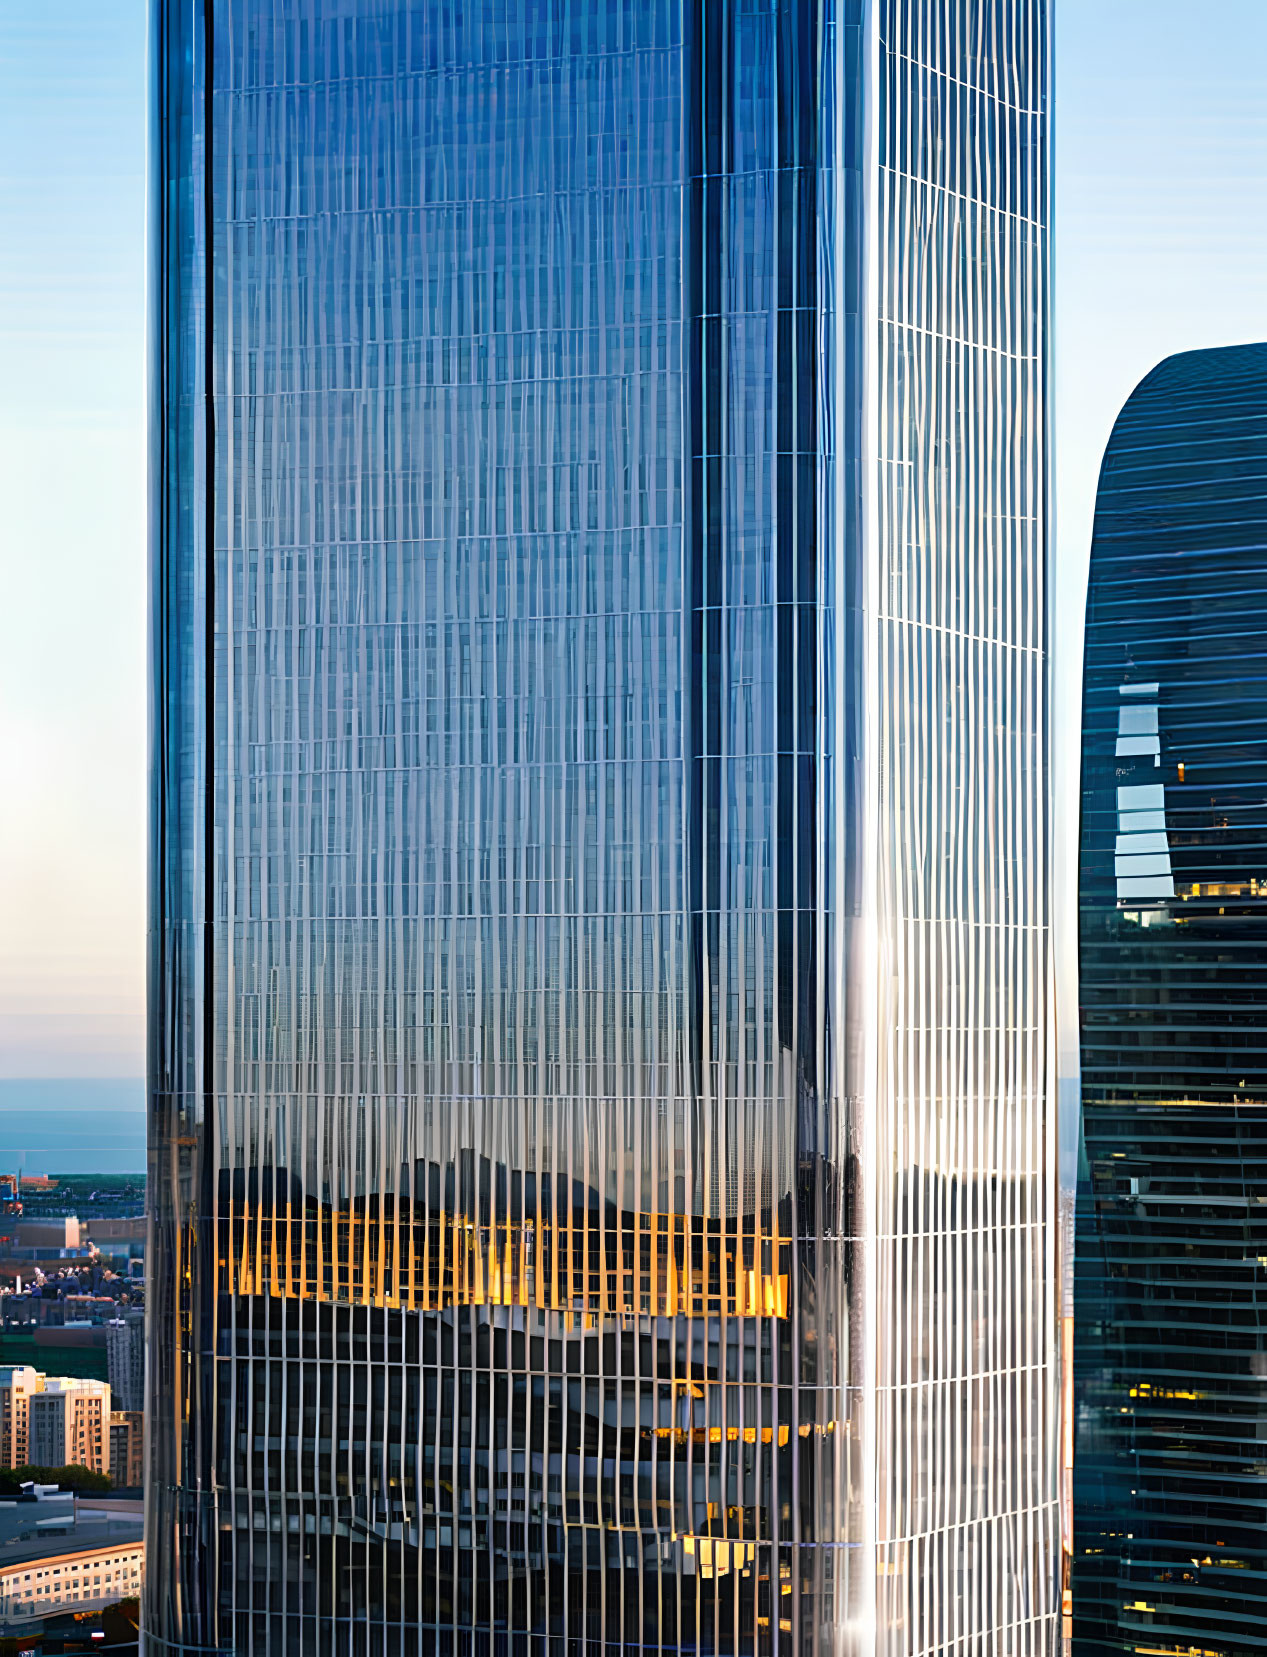 Reflective glass skyscrapers in golden sunset light